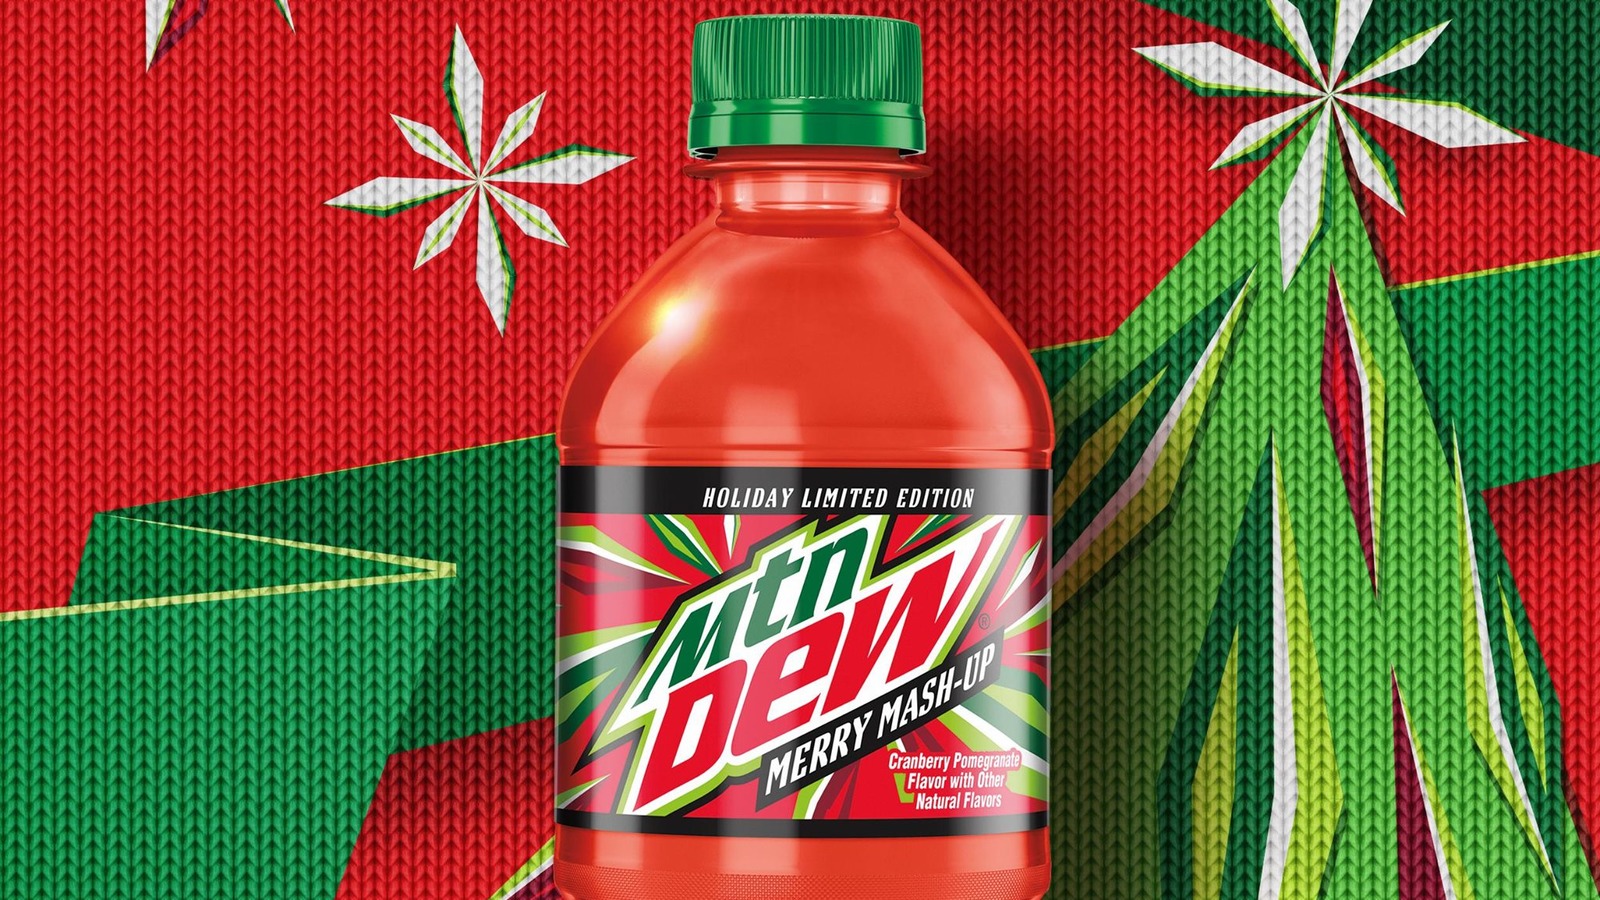 Mountain Dew Fans Are Divided On This Returning Holiday Flavor